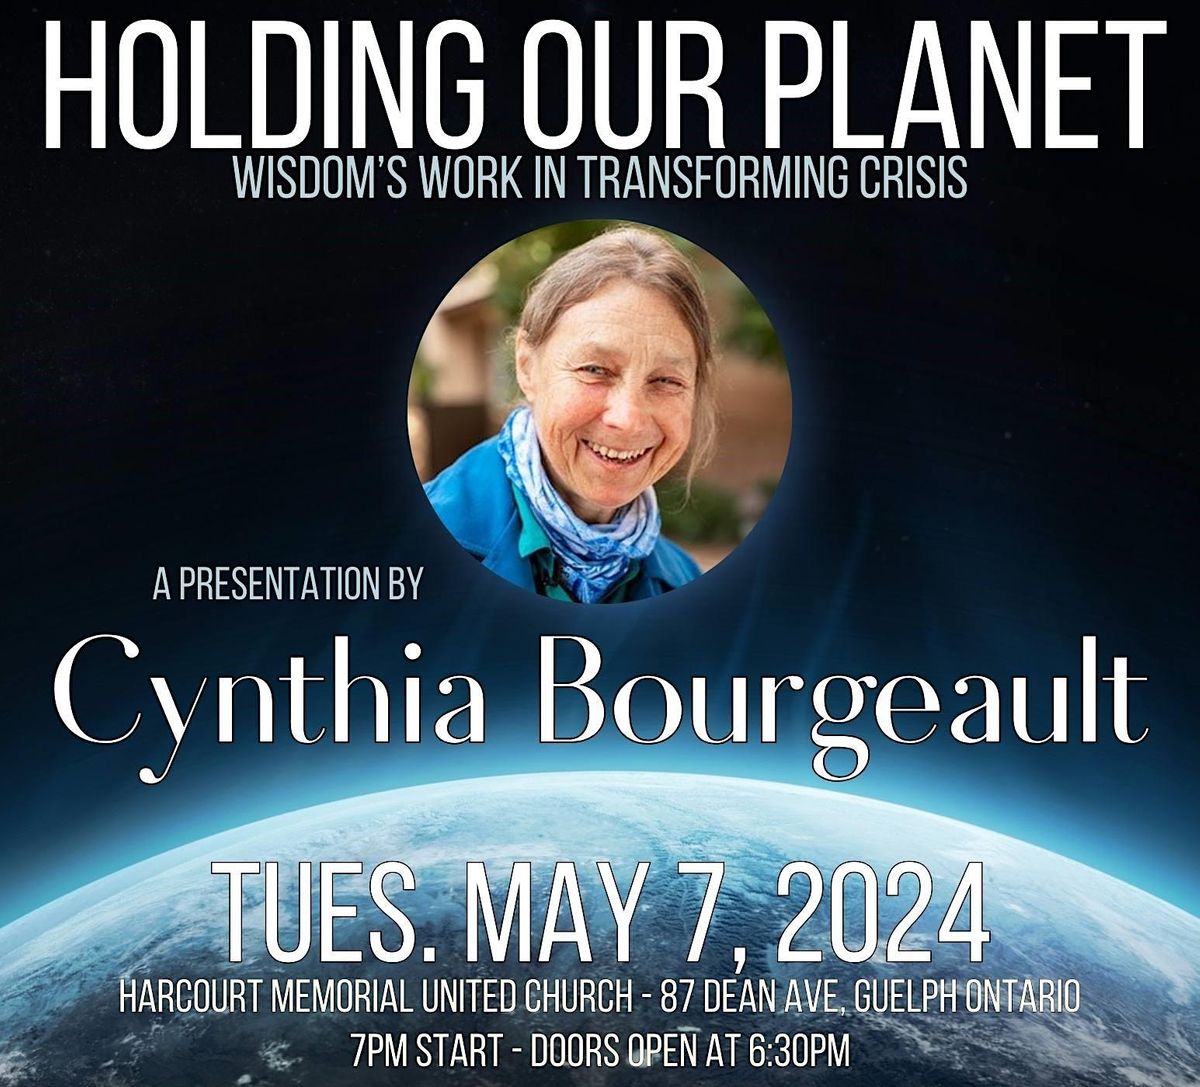 Cynthia Bourgeault - Holding Our Planet: Wisdom's Work Transforming Crisis